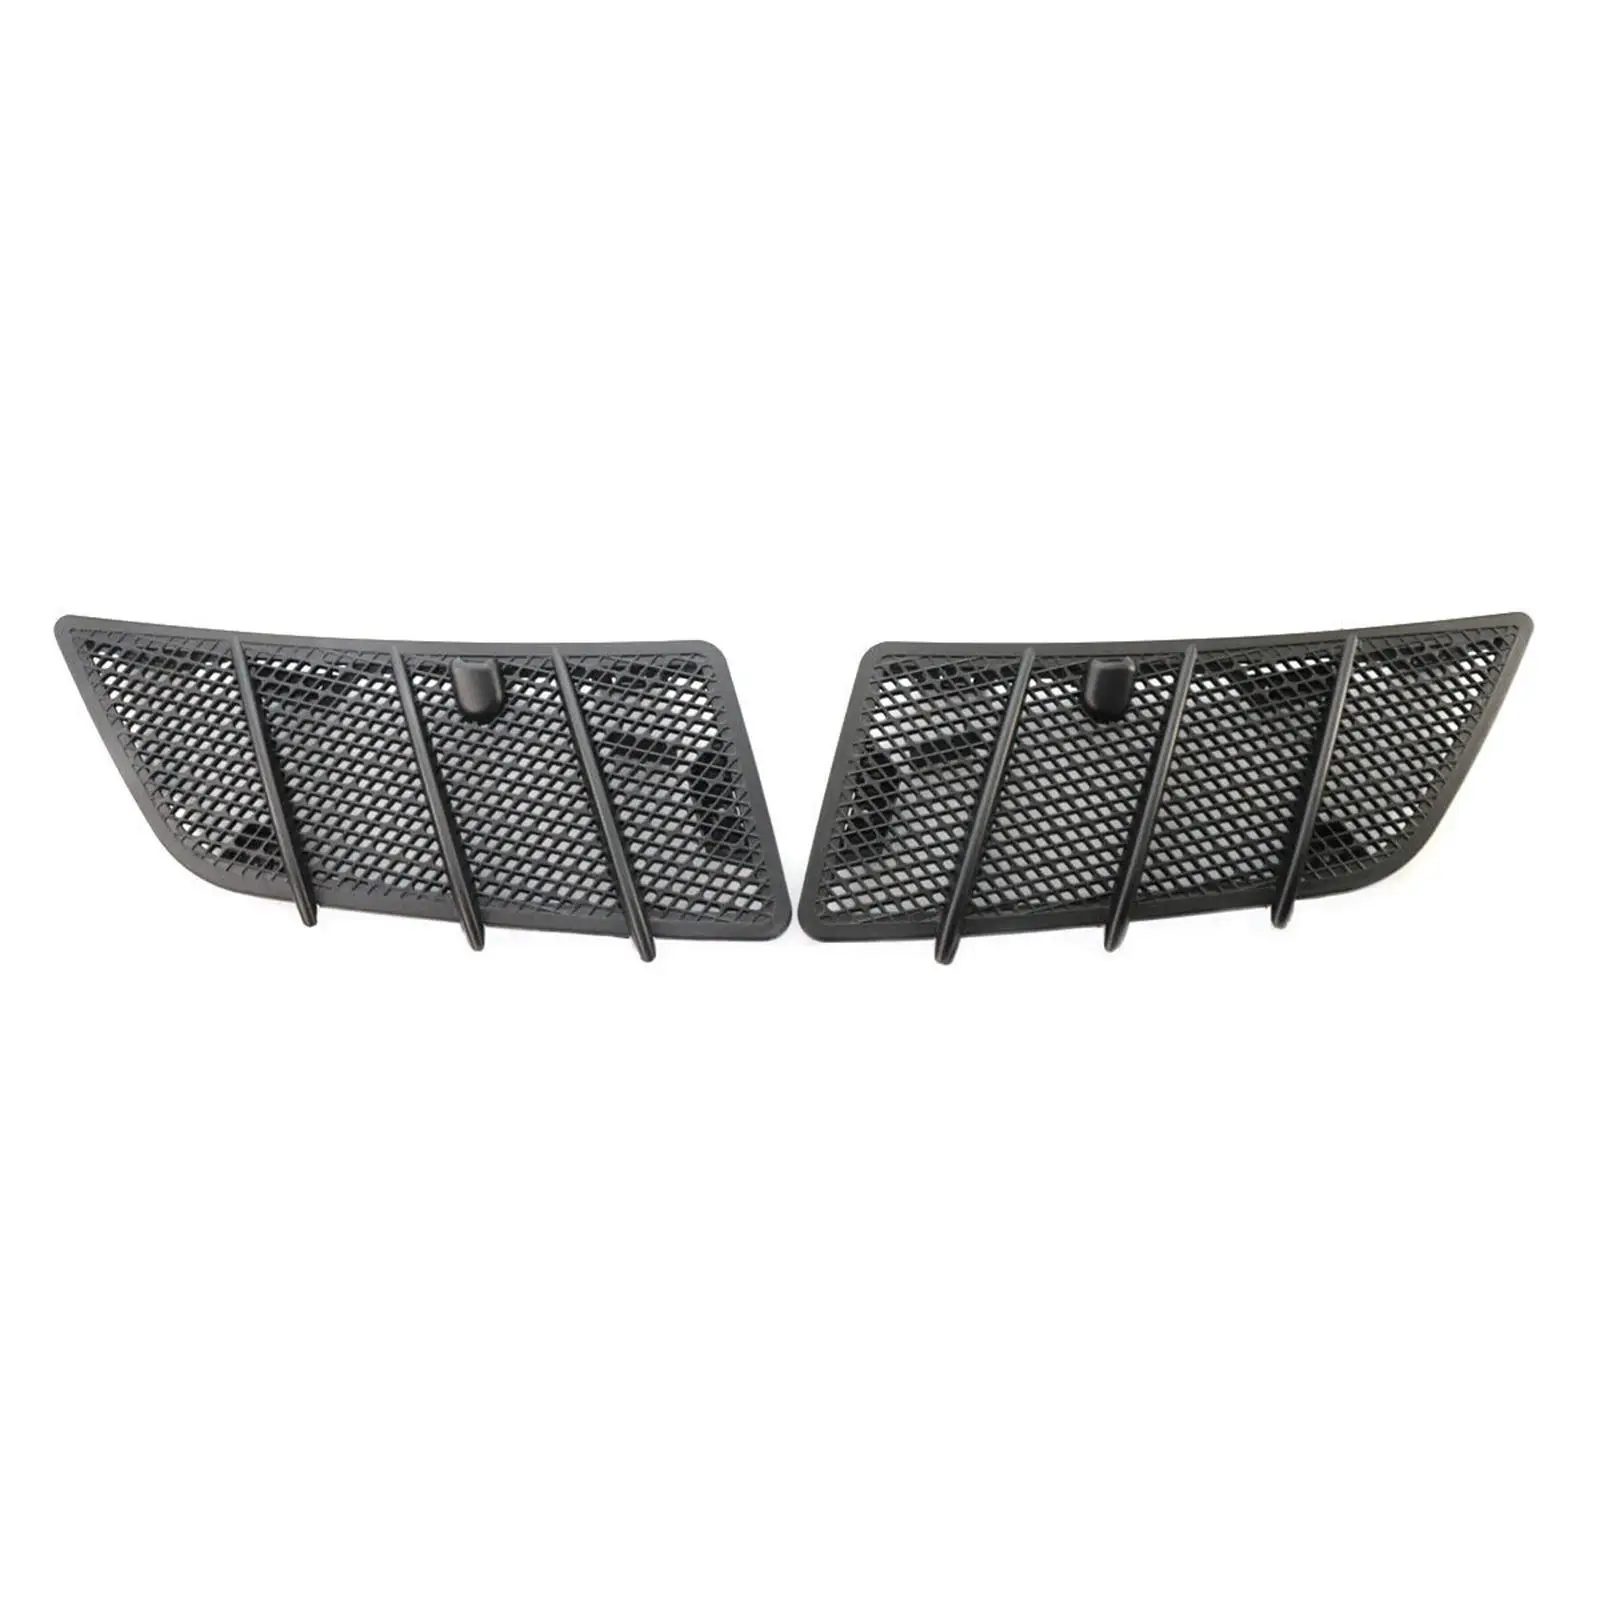 Hood Air Vent Grille Cover Insert Mesh High Quality Black Durable Directly Replace for W164 ml GL Class Accessory